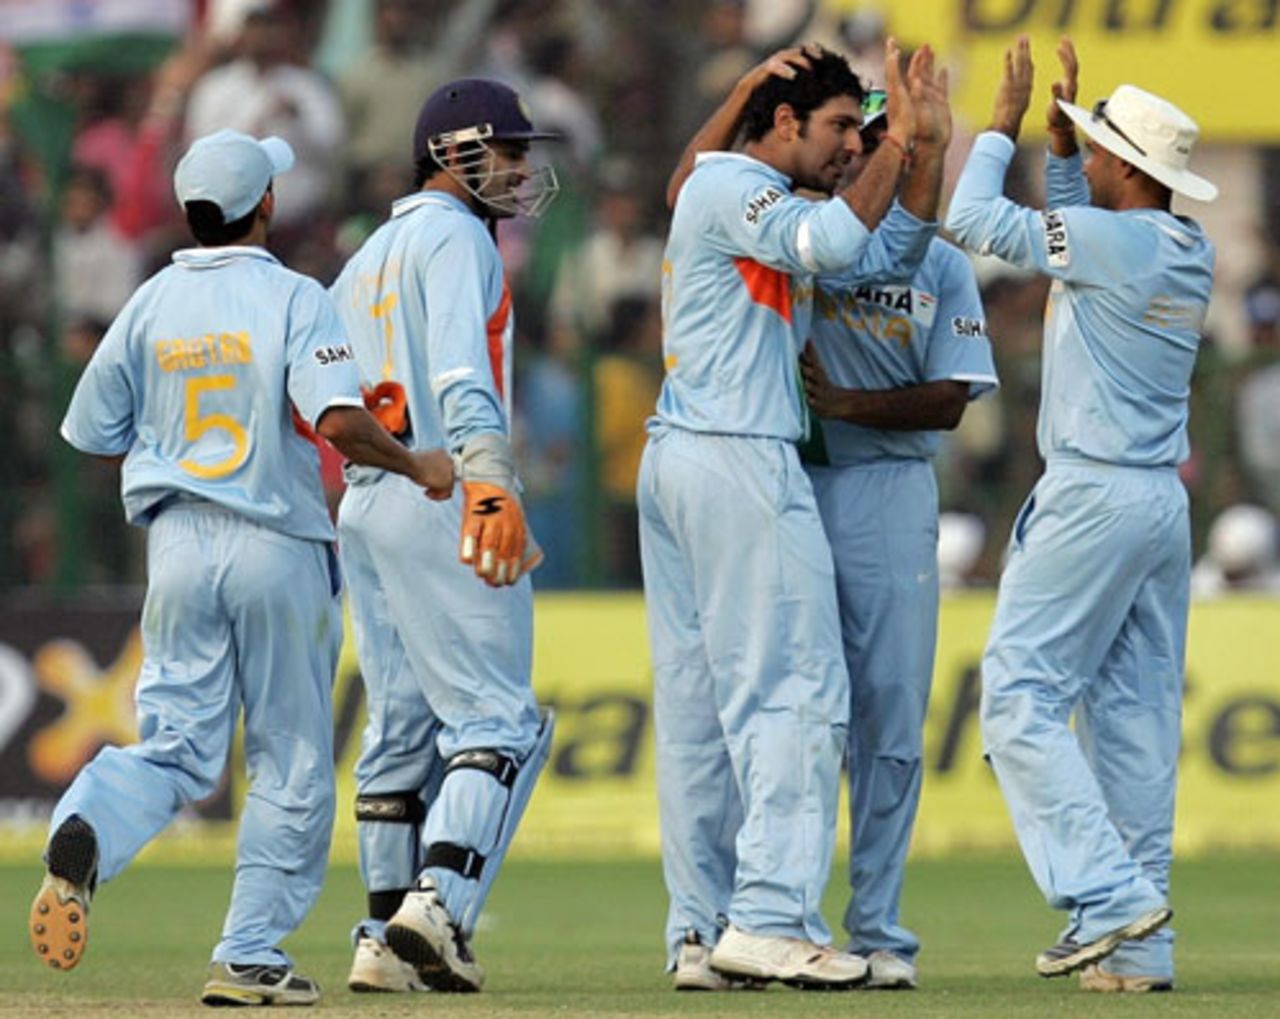 Yuvraj Singh celebrates with his team-mates after taking the crucial wicket of Younis Khan, India v Pakistan, 4th ODI, Gwalior, November 15, 2007 